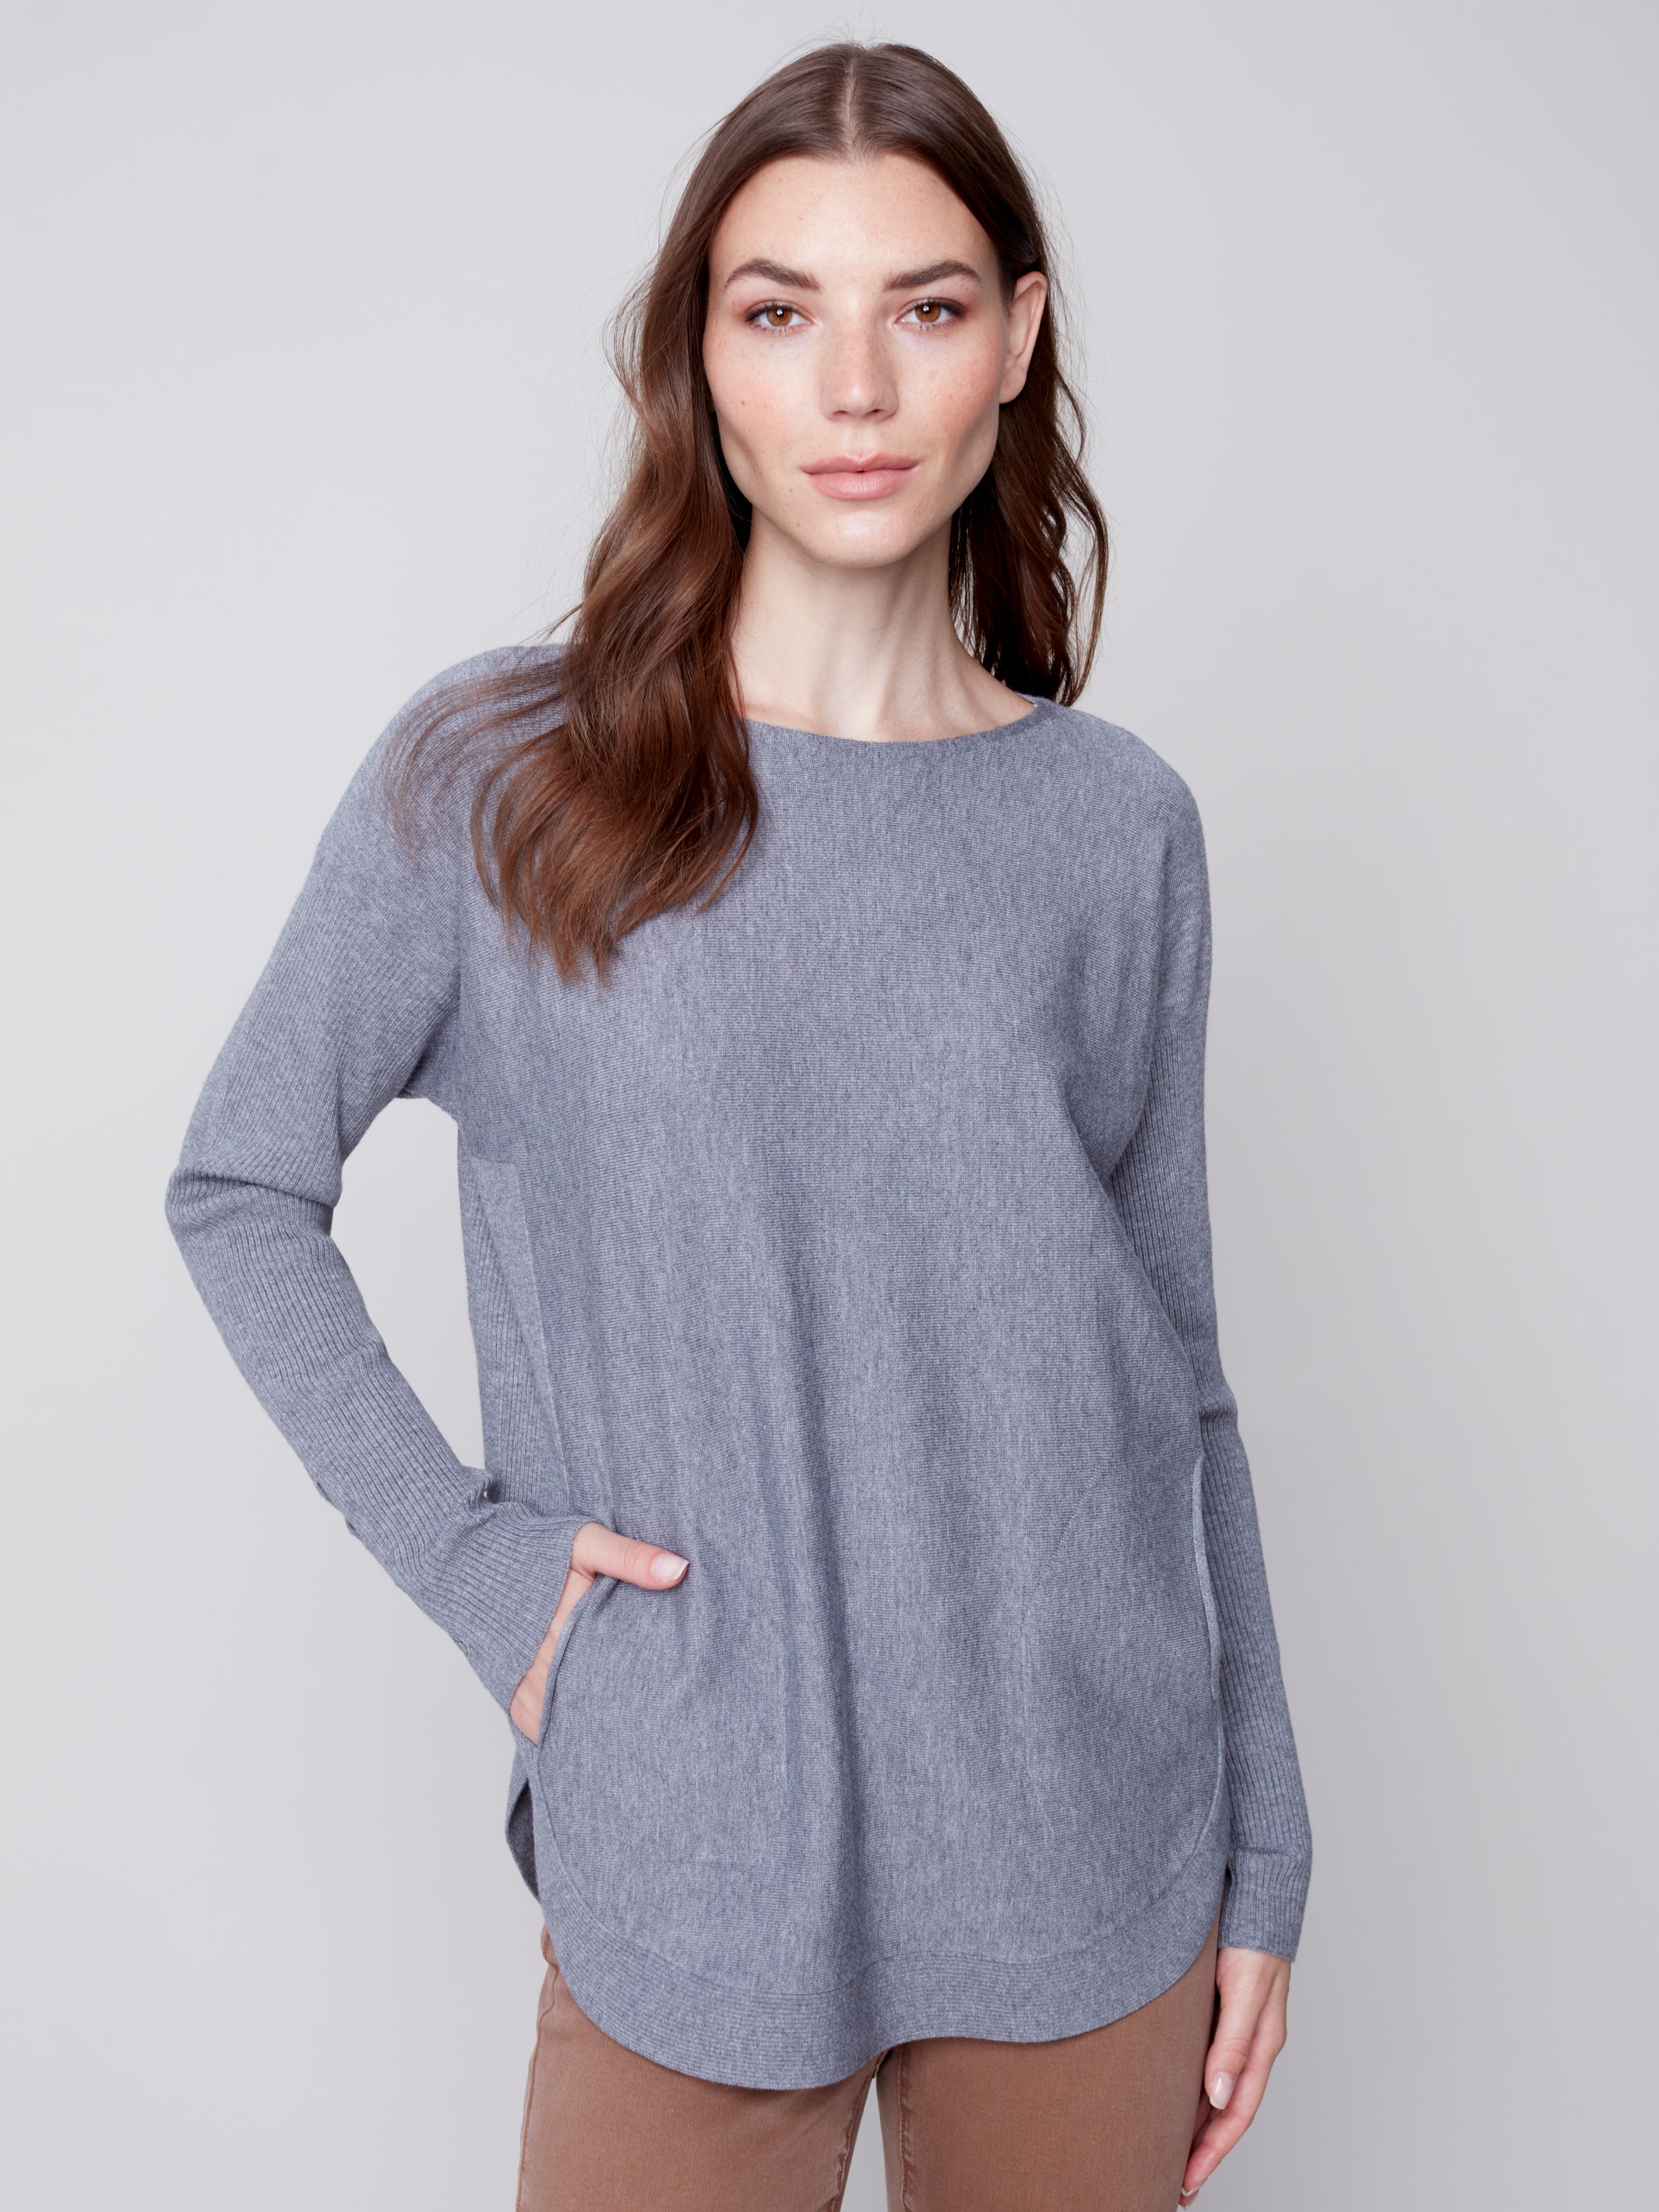 Sweater With Criss Cross Sleeve Detail C2380RR/464A 008